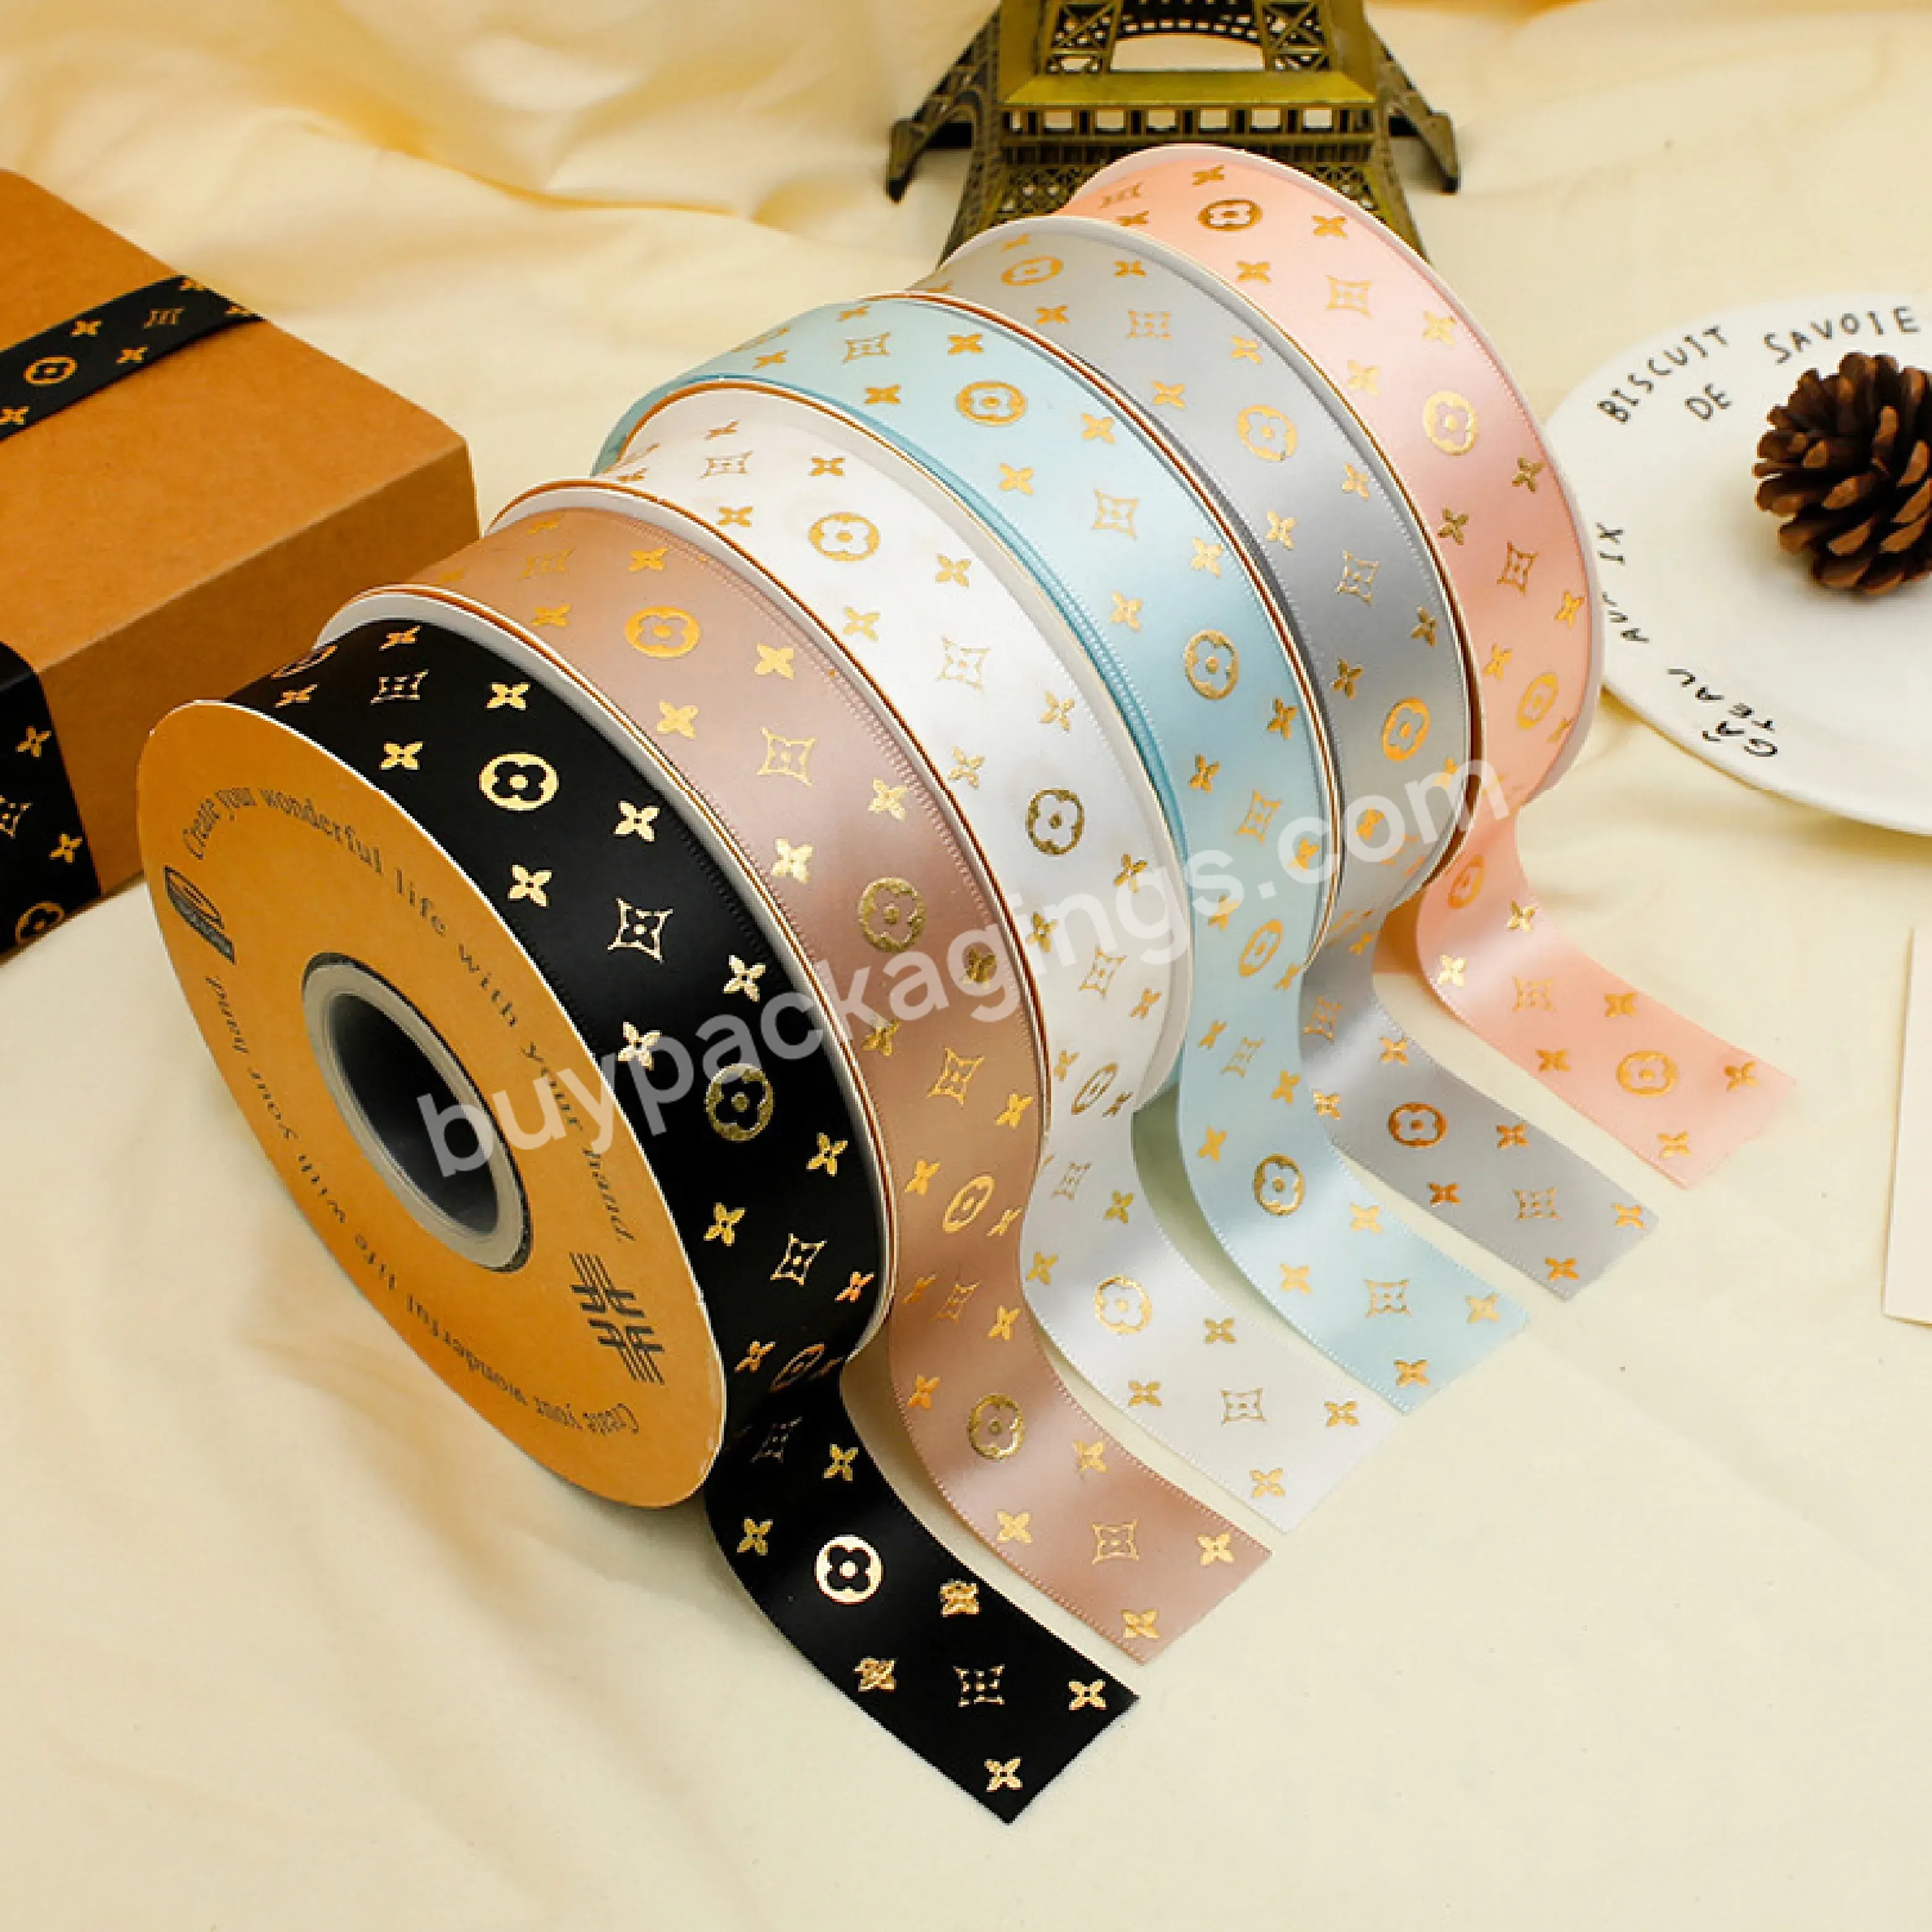 Printed Ribbon Gilded Ribbon Floral Flower Gift Bouquet Wrapping Paper Diy Material Ribbon